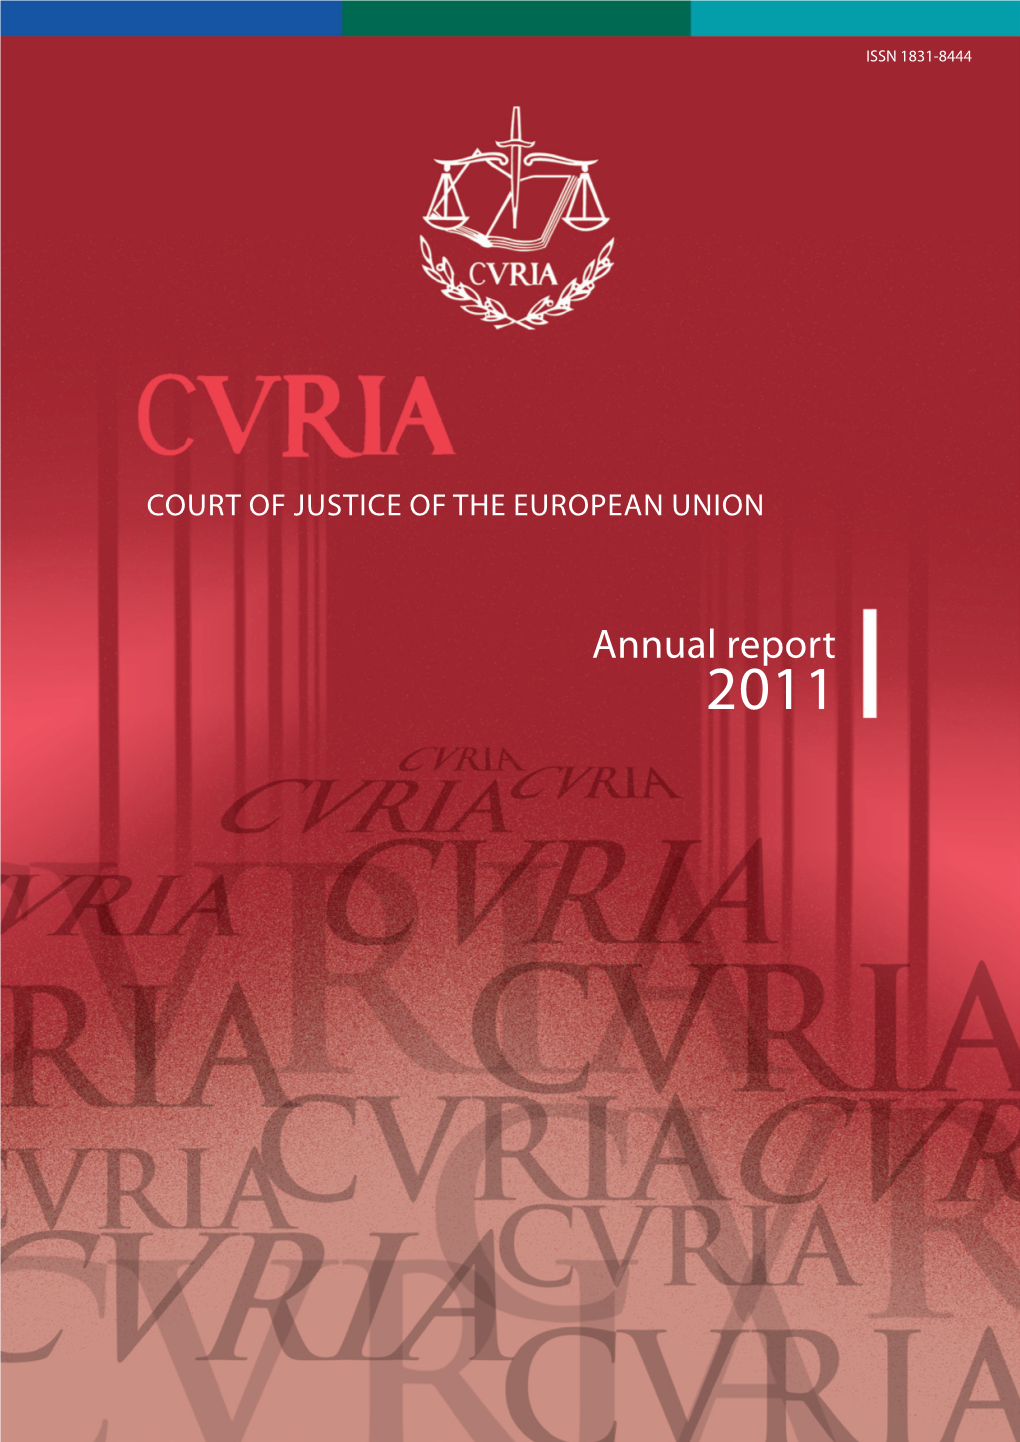 Annual Report 2011 of the Court of Justice of the European Union